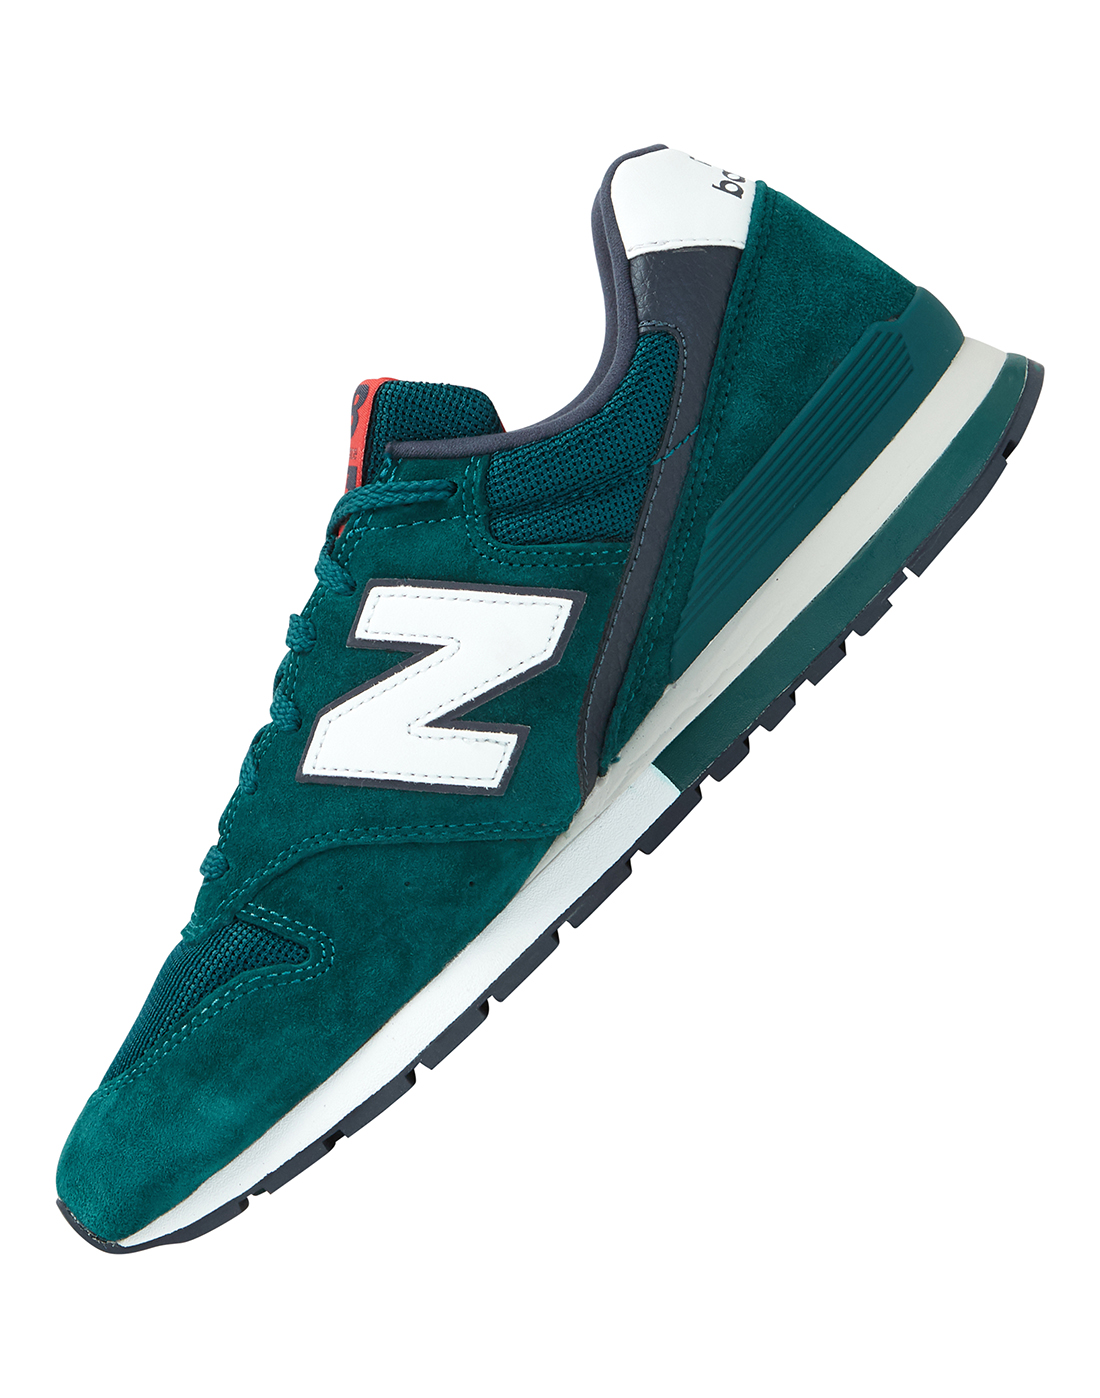 Funeral personalidad Marcha mala New Balance Mens 996 Trainers - Green | Life Style Sports IE